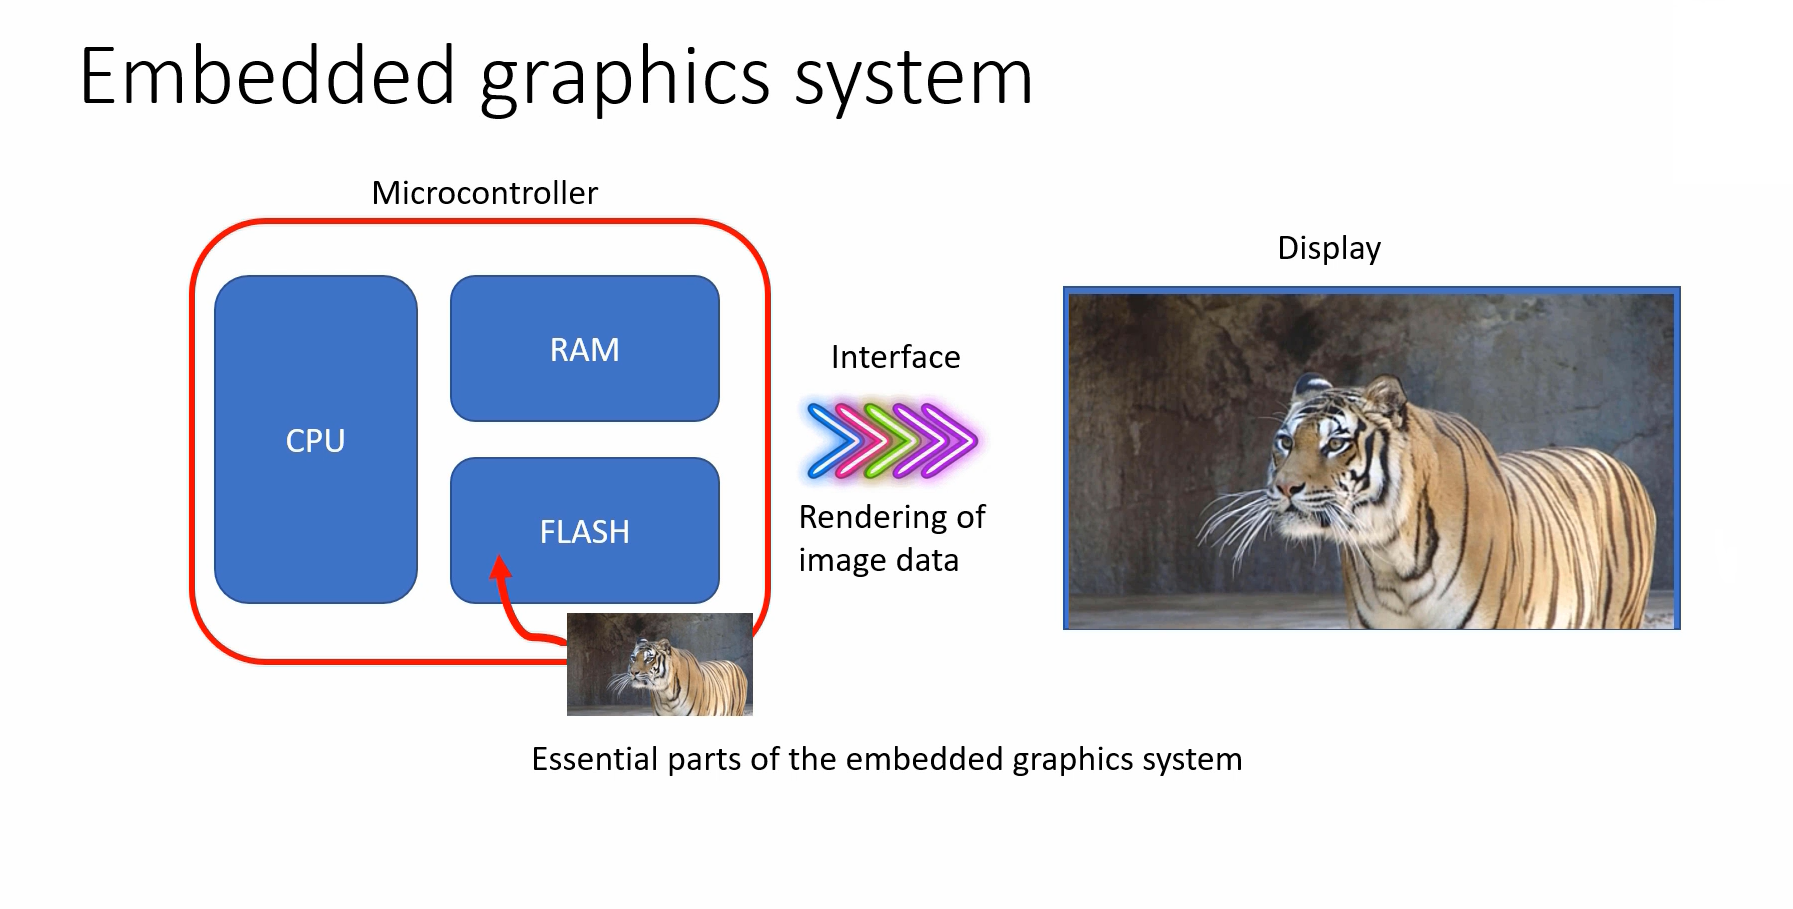 Figure 2. Essential parts of the embedded graphics system